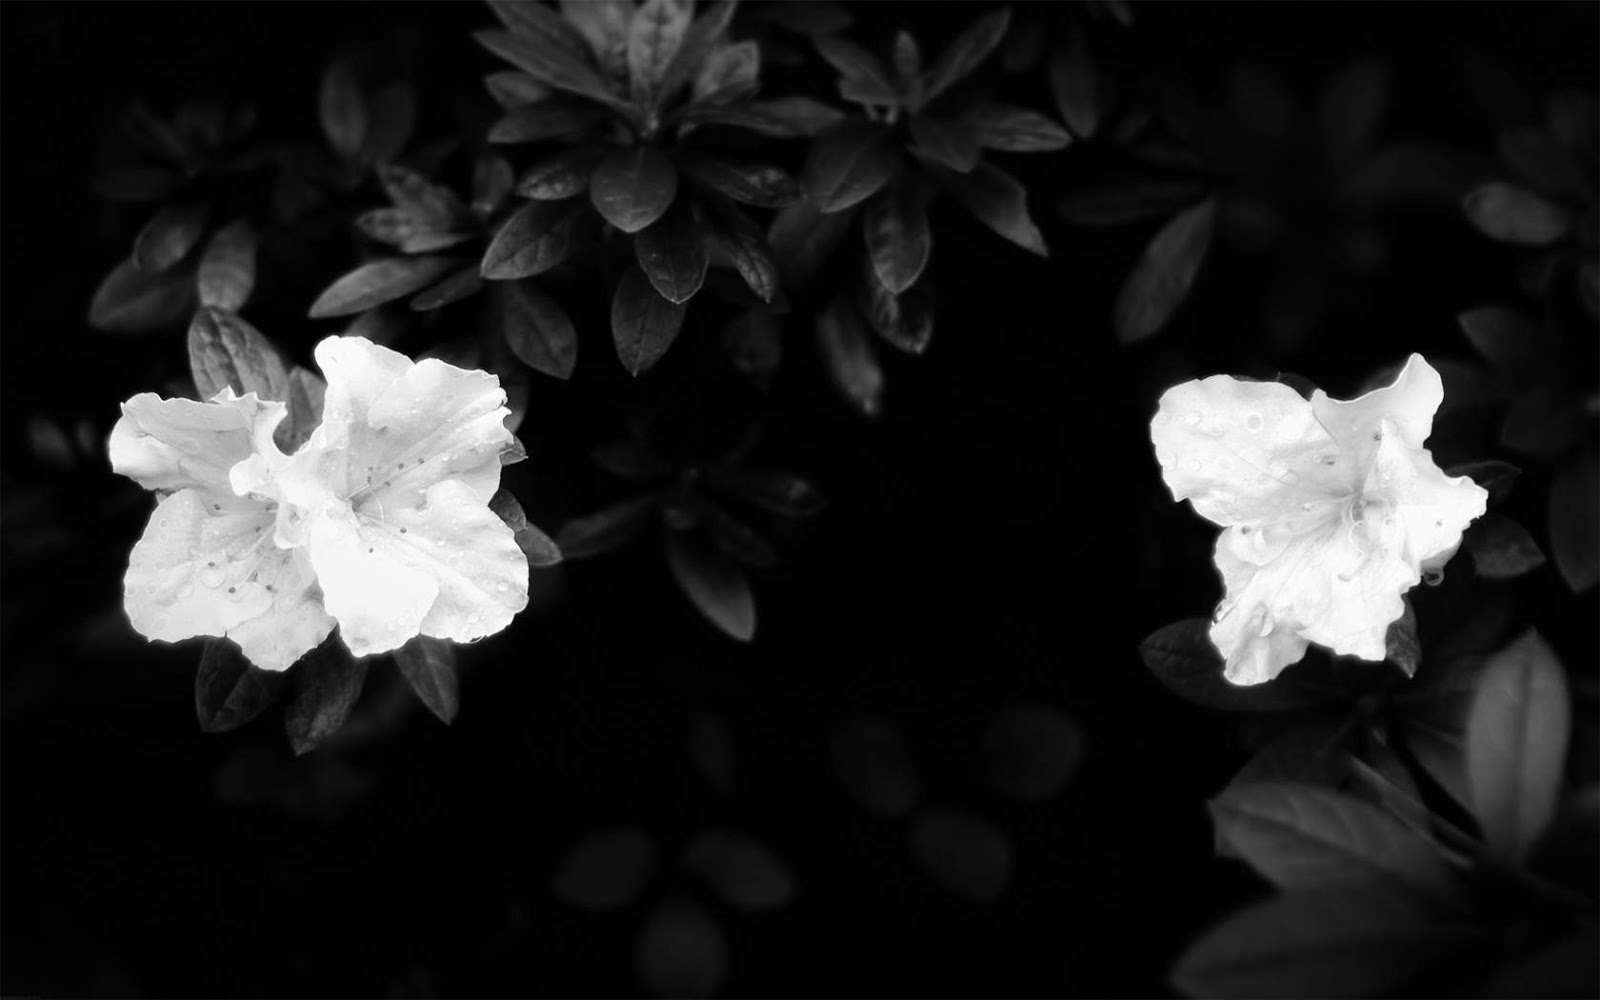 And White Wallpaper Flowers On Black Background